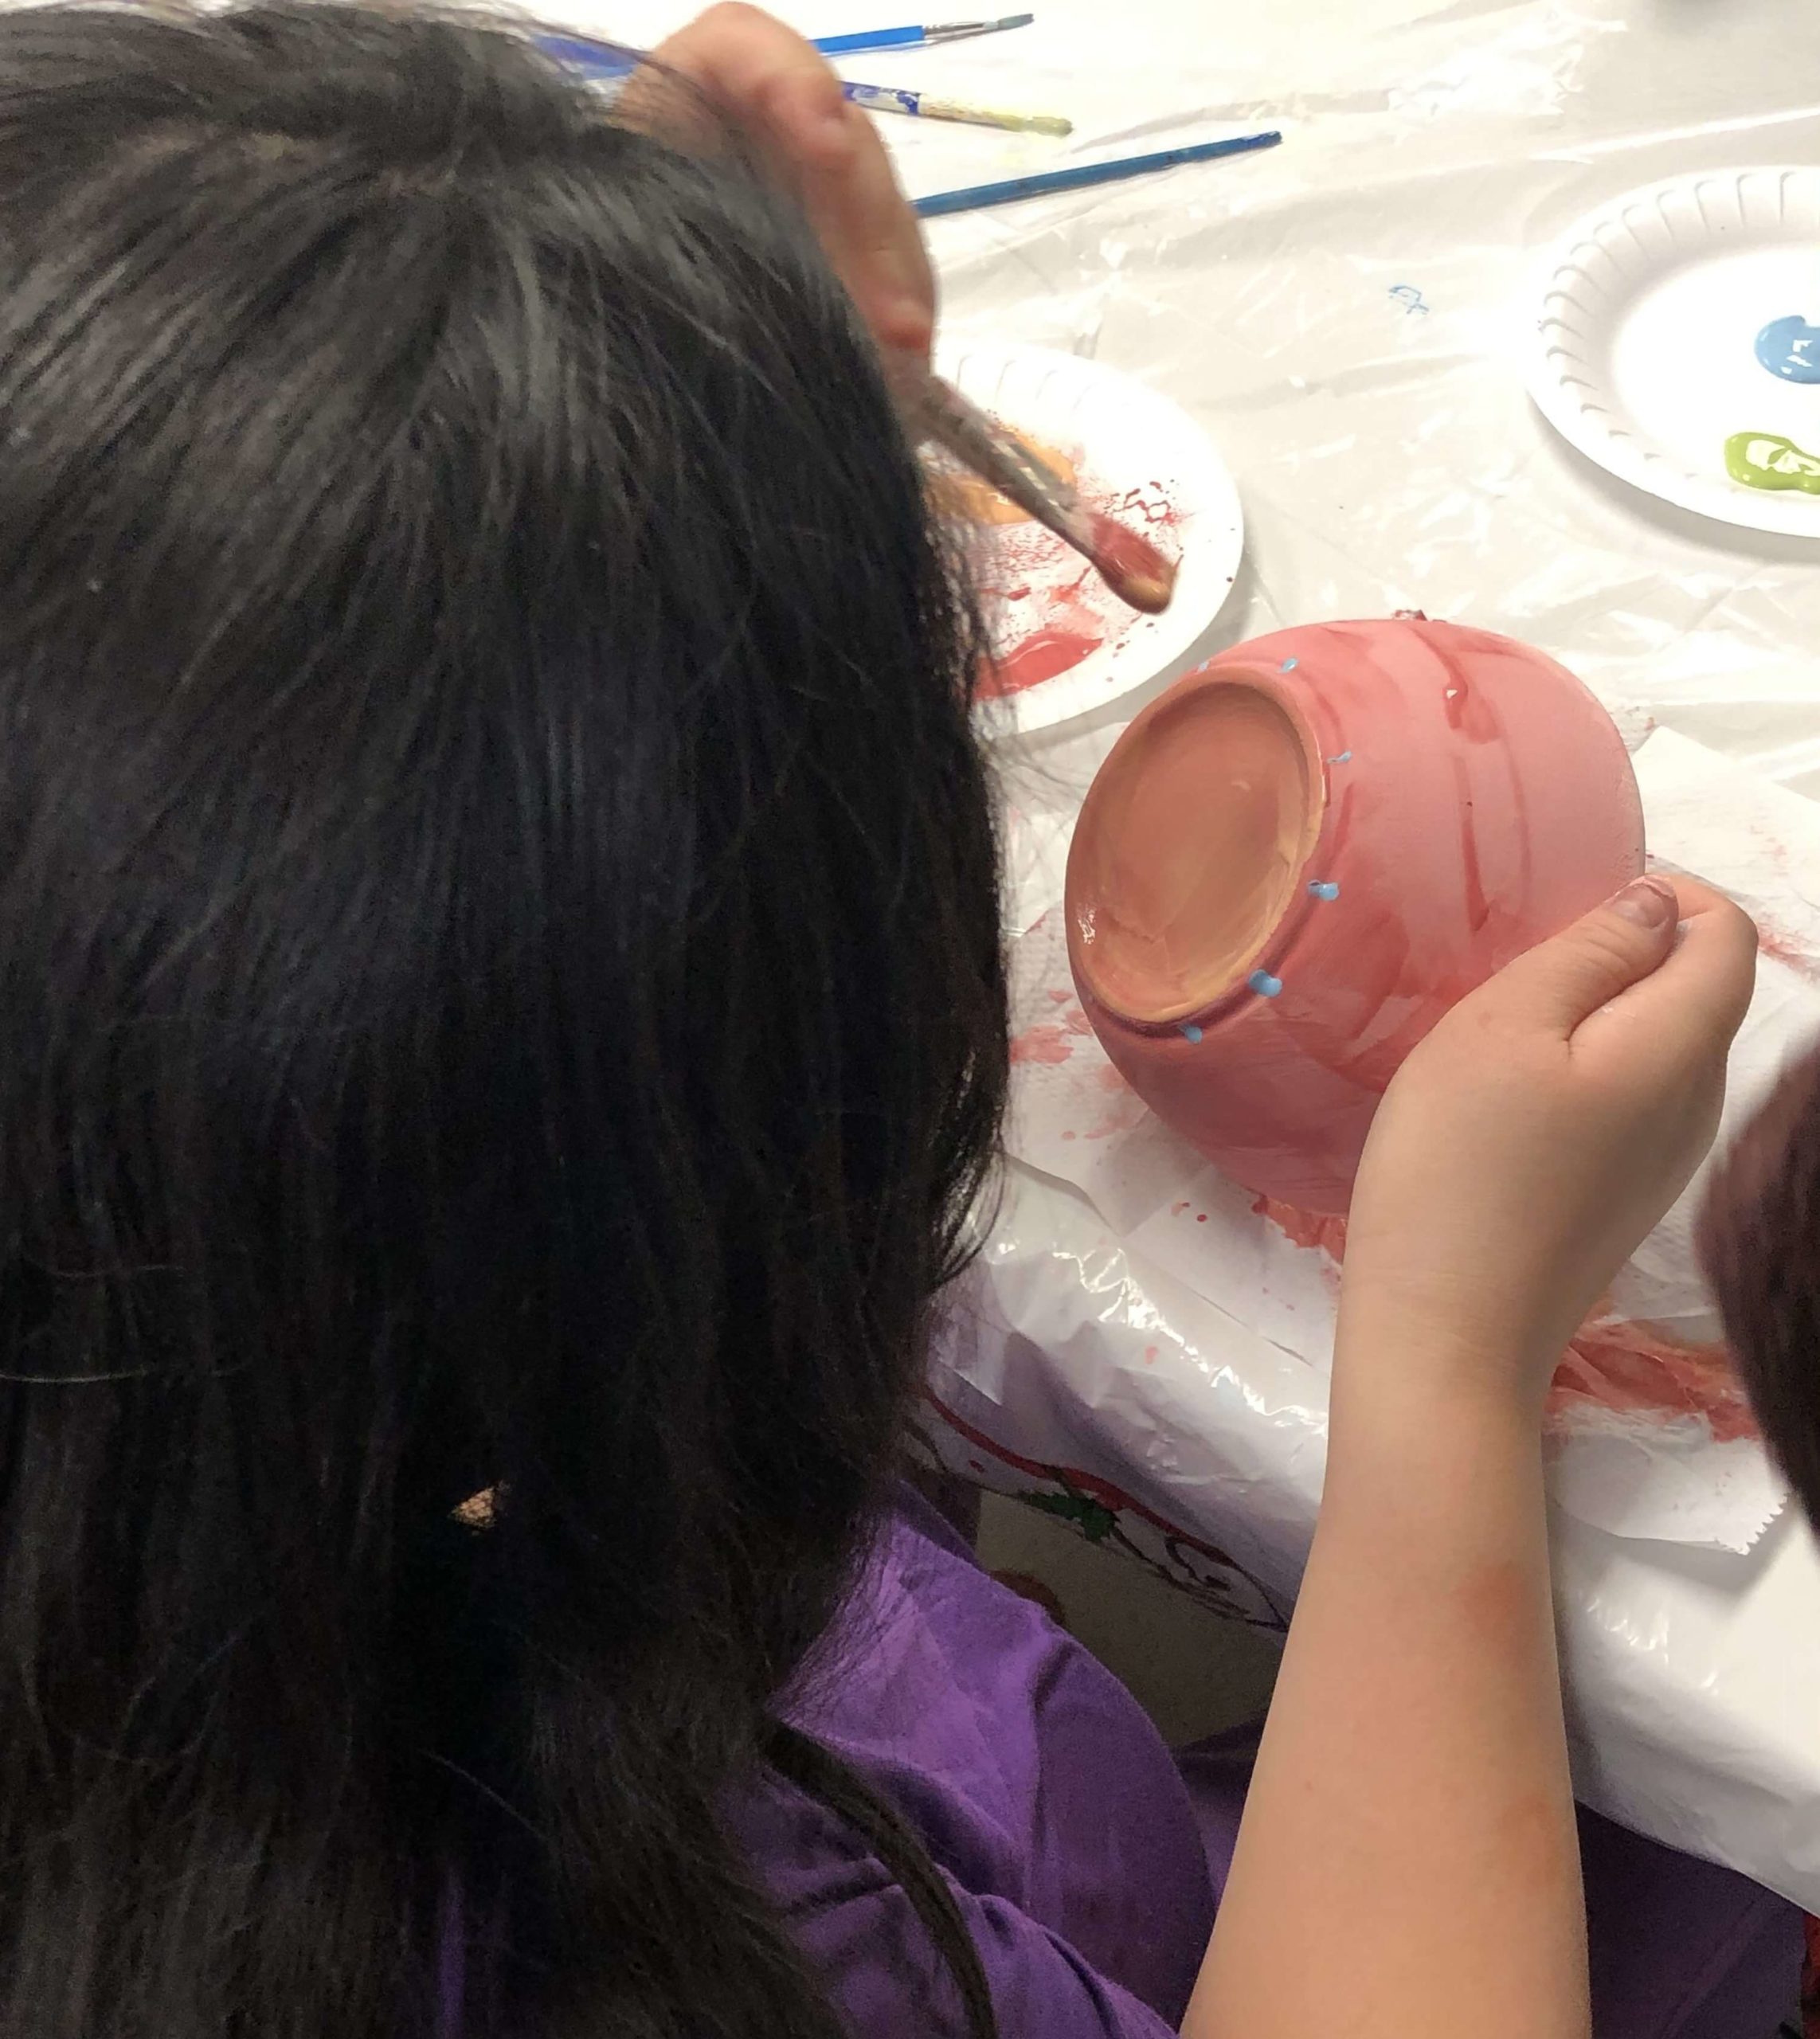 painting pottery